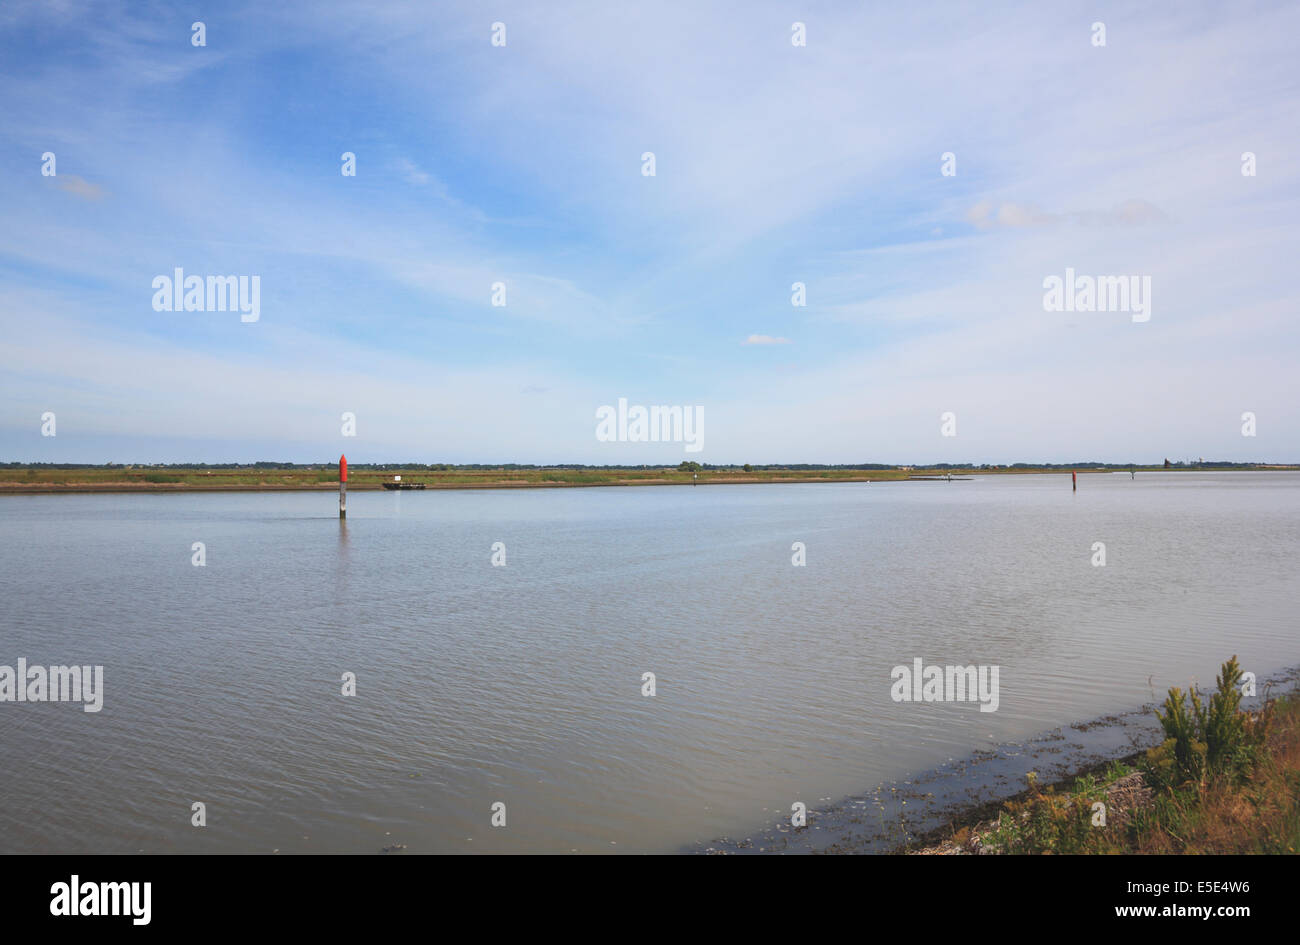 Breydon Water High Resolution Stock Photography and Images - Alamy